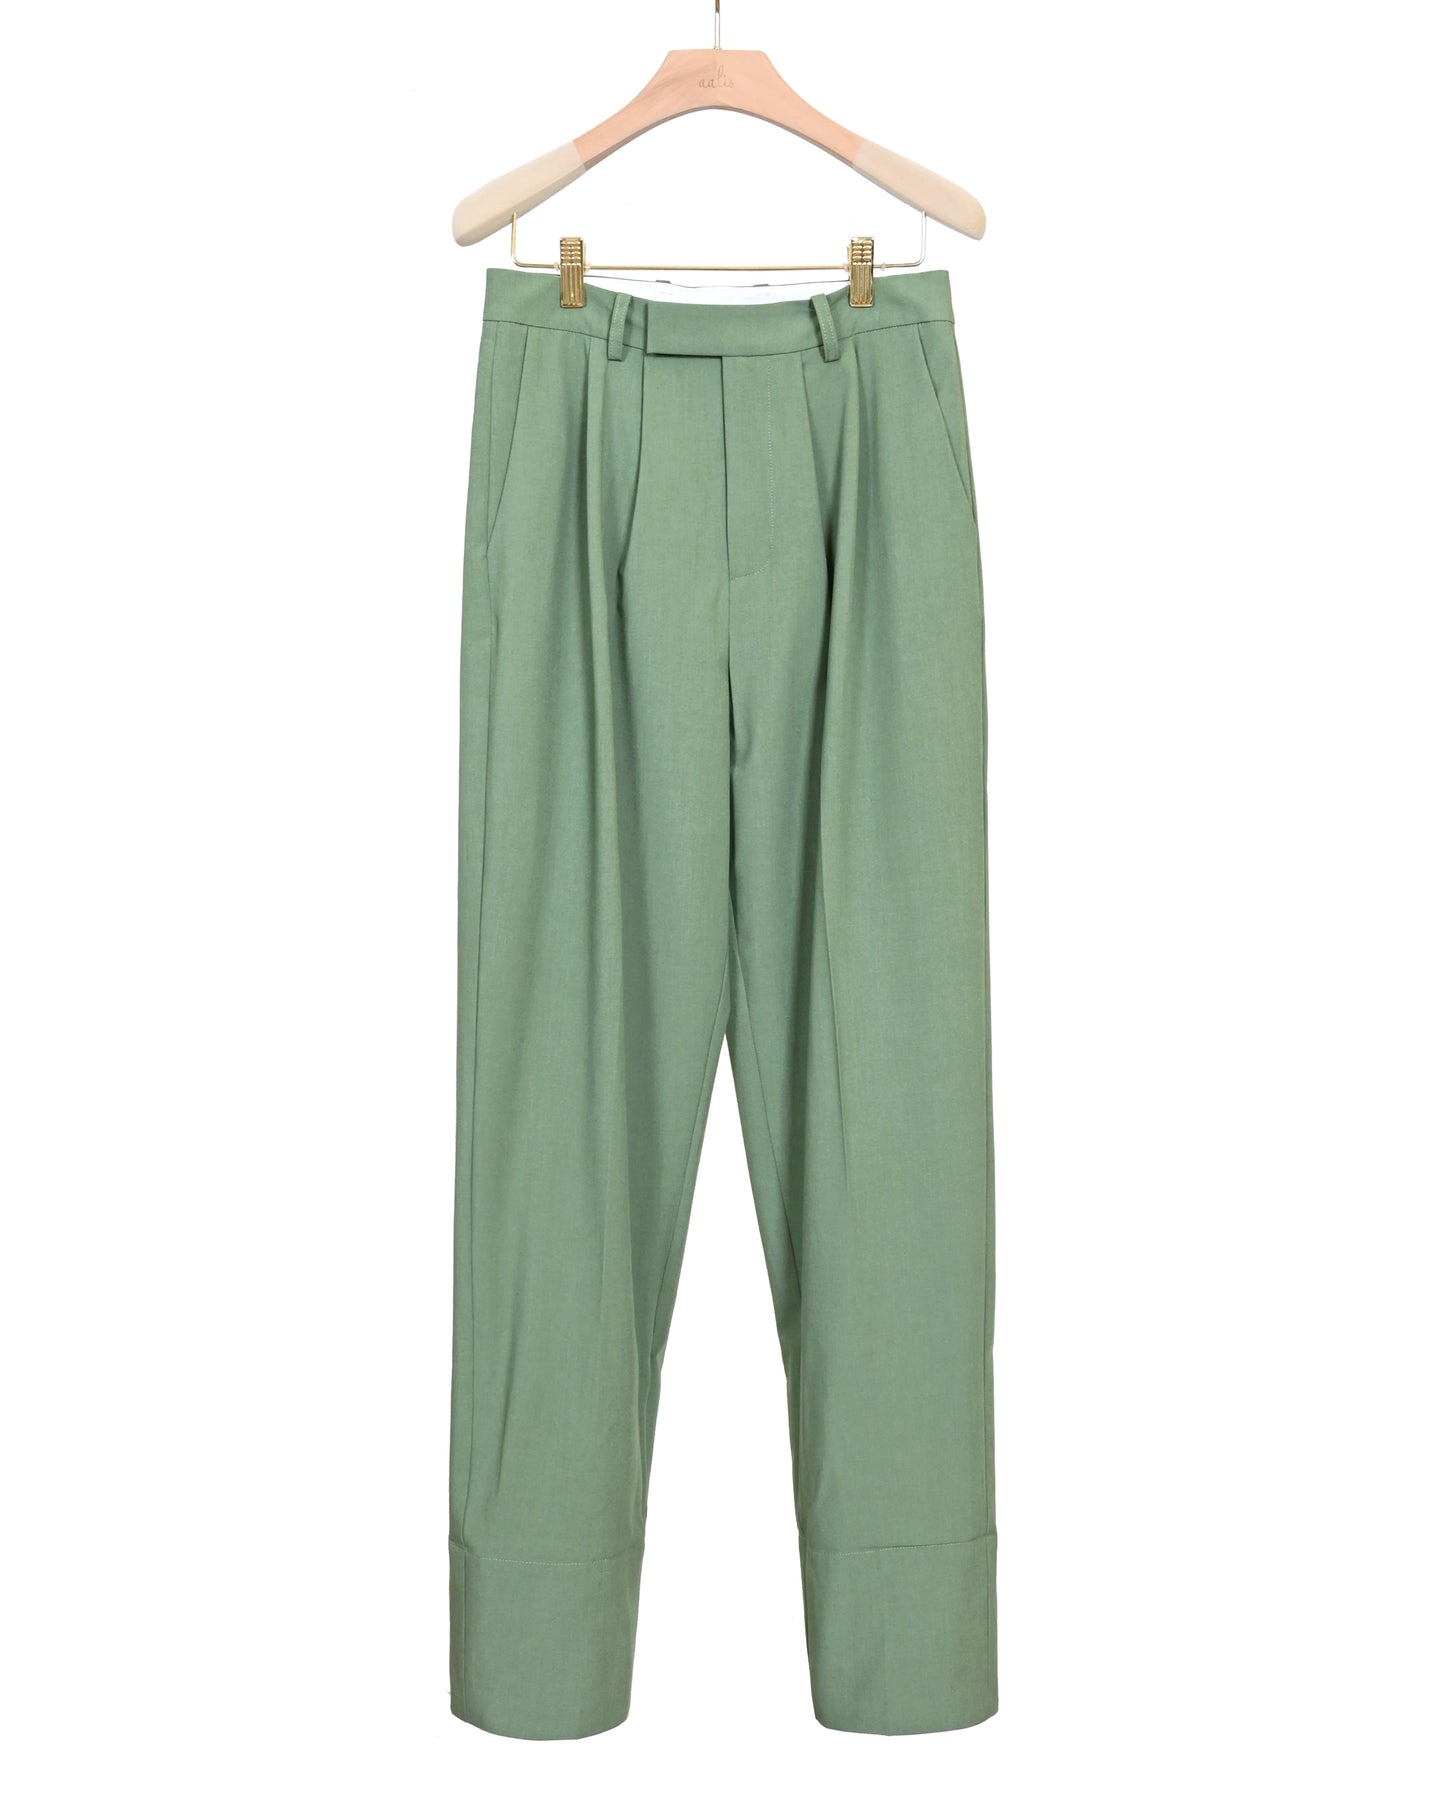 aalis LIZ white cuff suiting pants (Green)